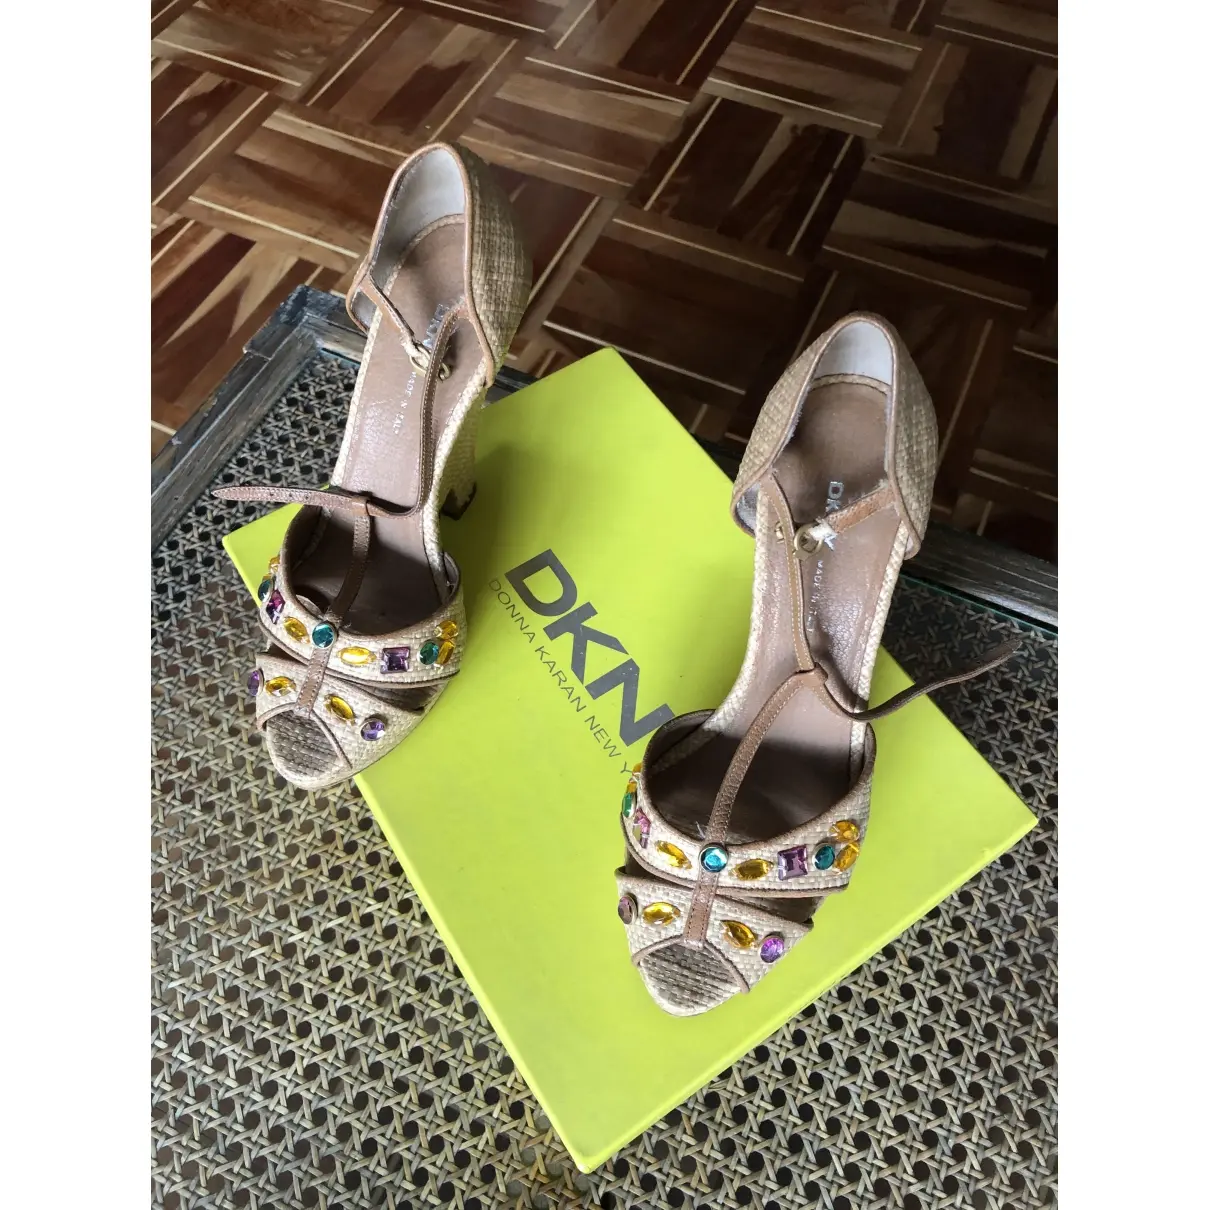 Dkny Leather sandals for sale